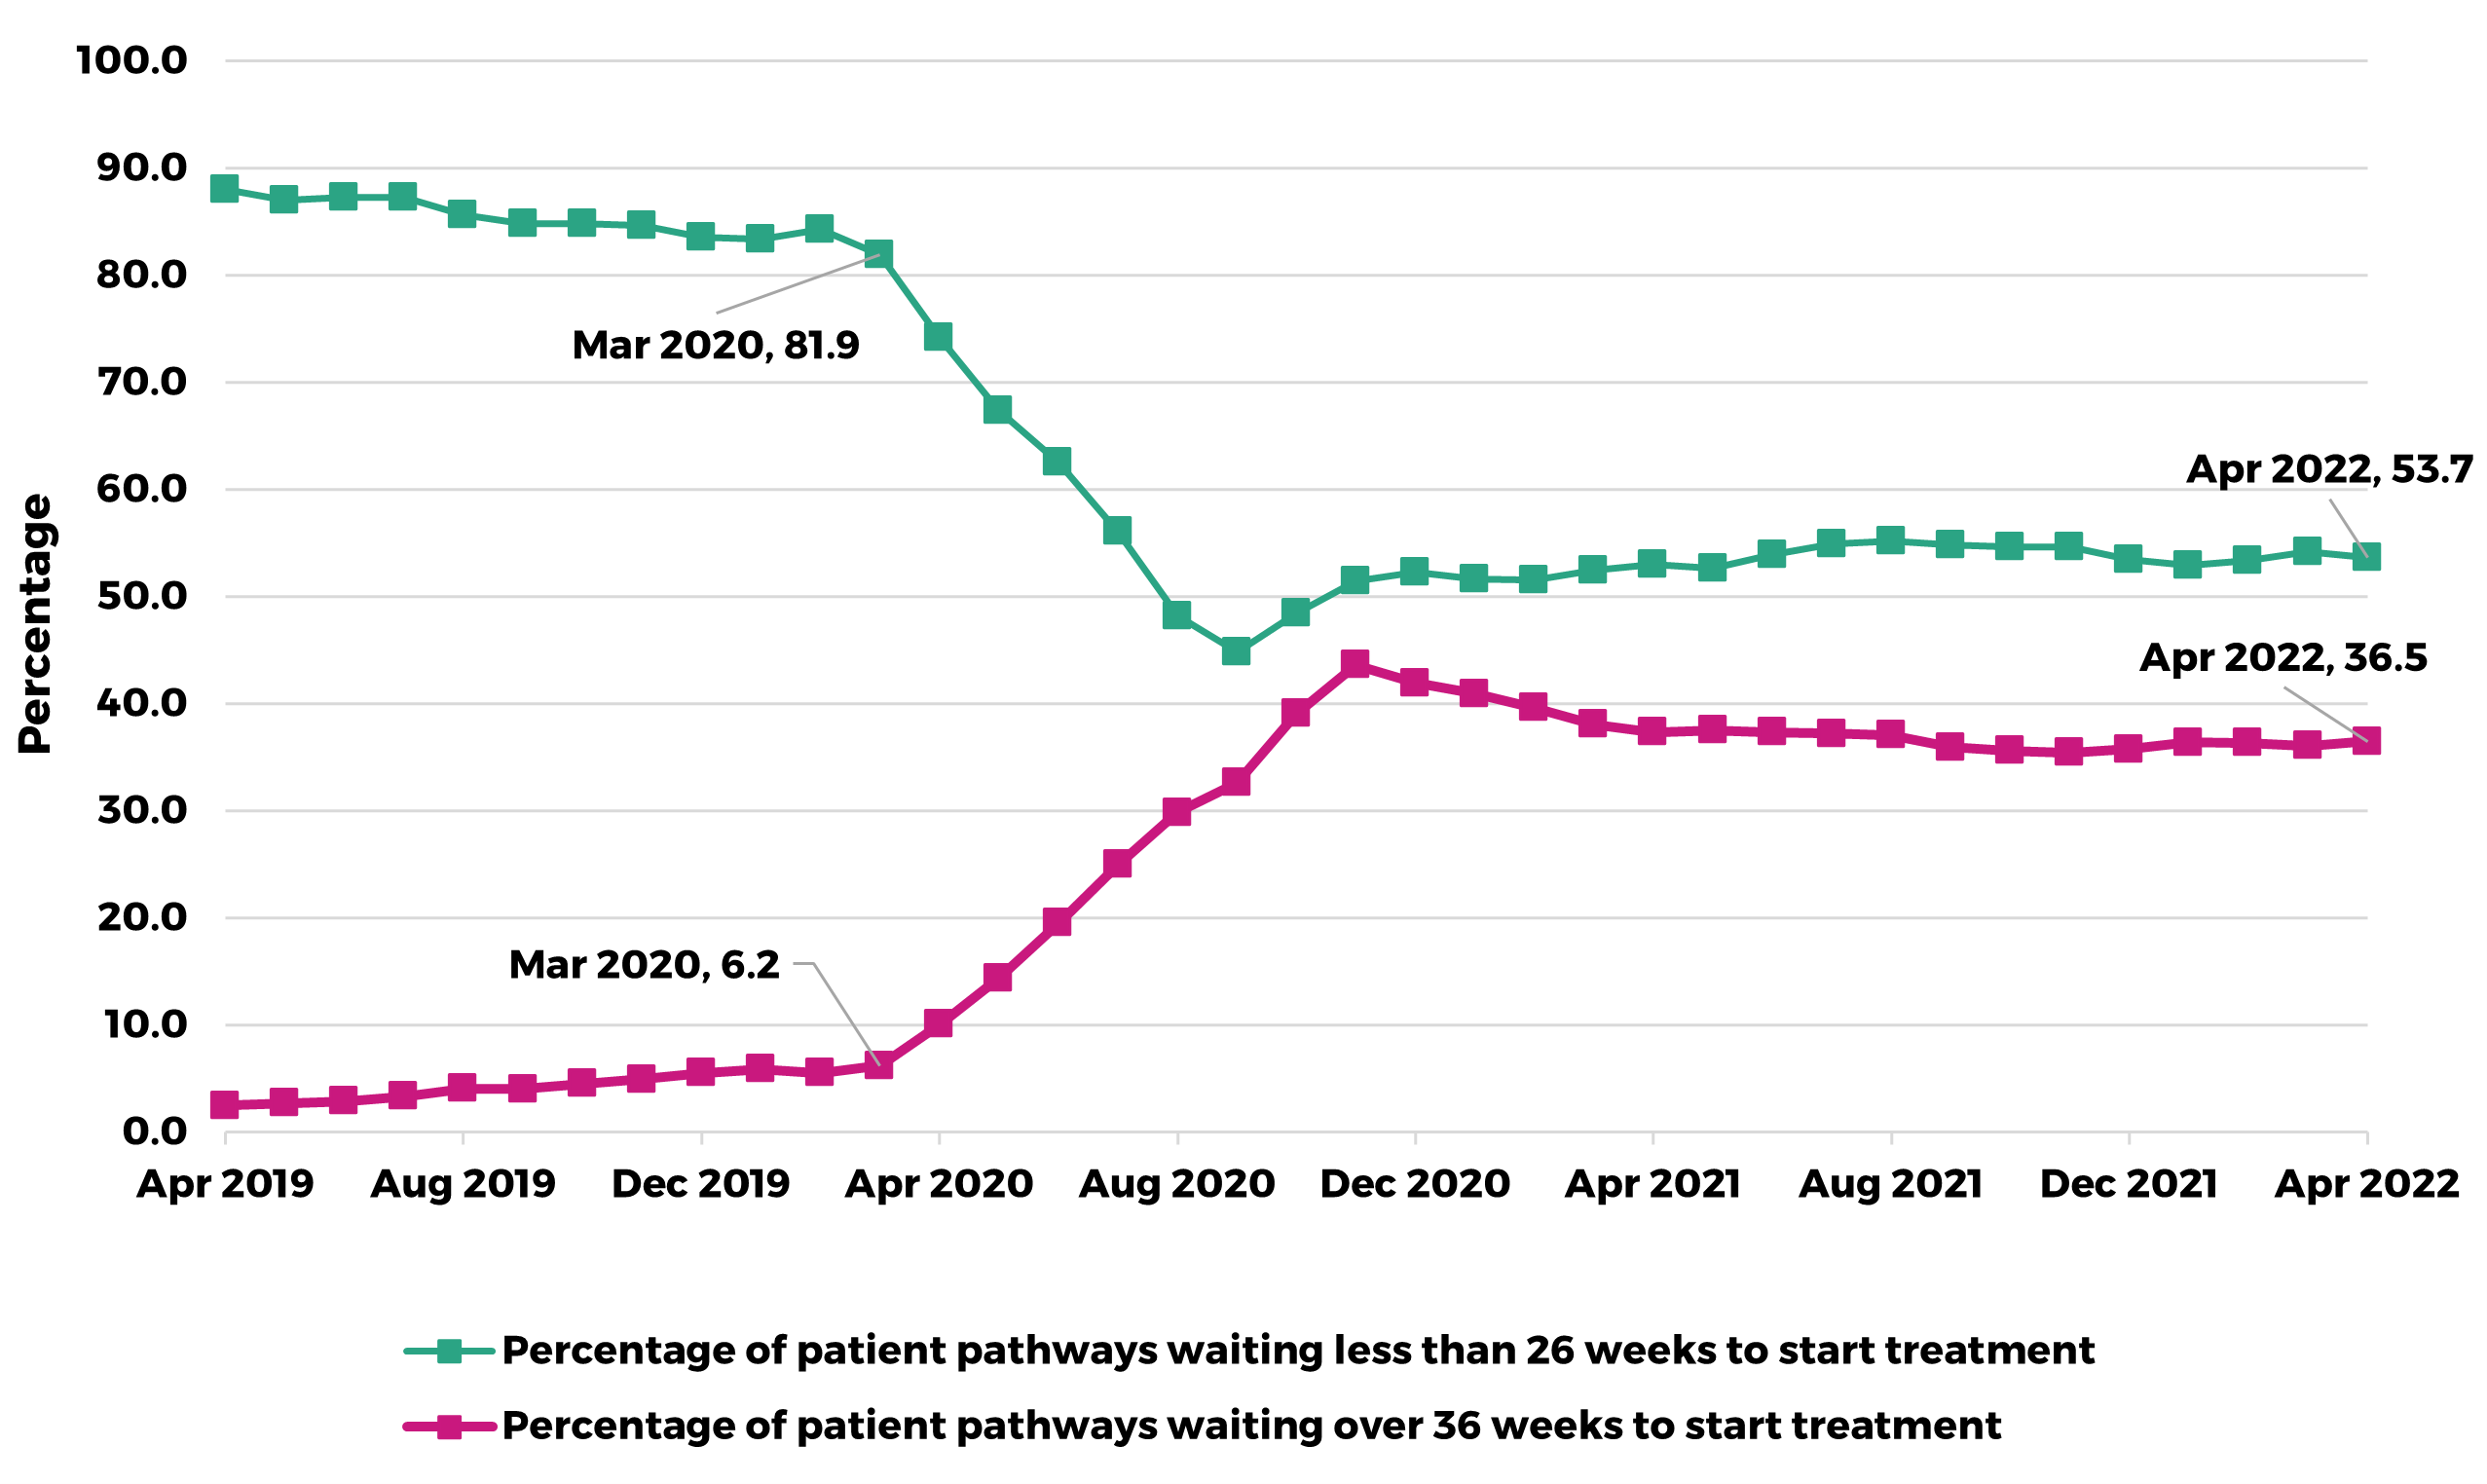 Graph showing the percentage of patient pathways waiting less than 26 weeks and more than 36 weeks to start treatment from April 2019 to April 2022. The percentage of those waiting less than 26 weeks has fallen from 81.9% in March 2020 to 53.7% in April 2022. The Welsh Government target is 95%. The percentage waiting more than 36 weeks in April 2022 was 36.5%, compared to 6.2% in March 2020. The Welsh Government target is 100%.